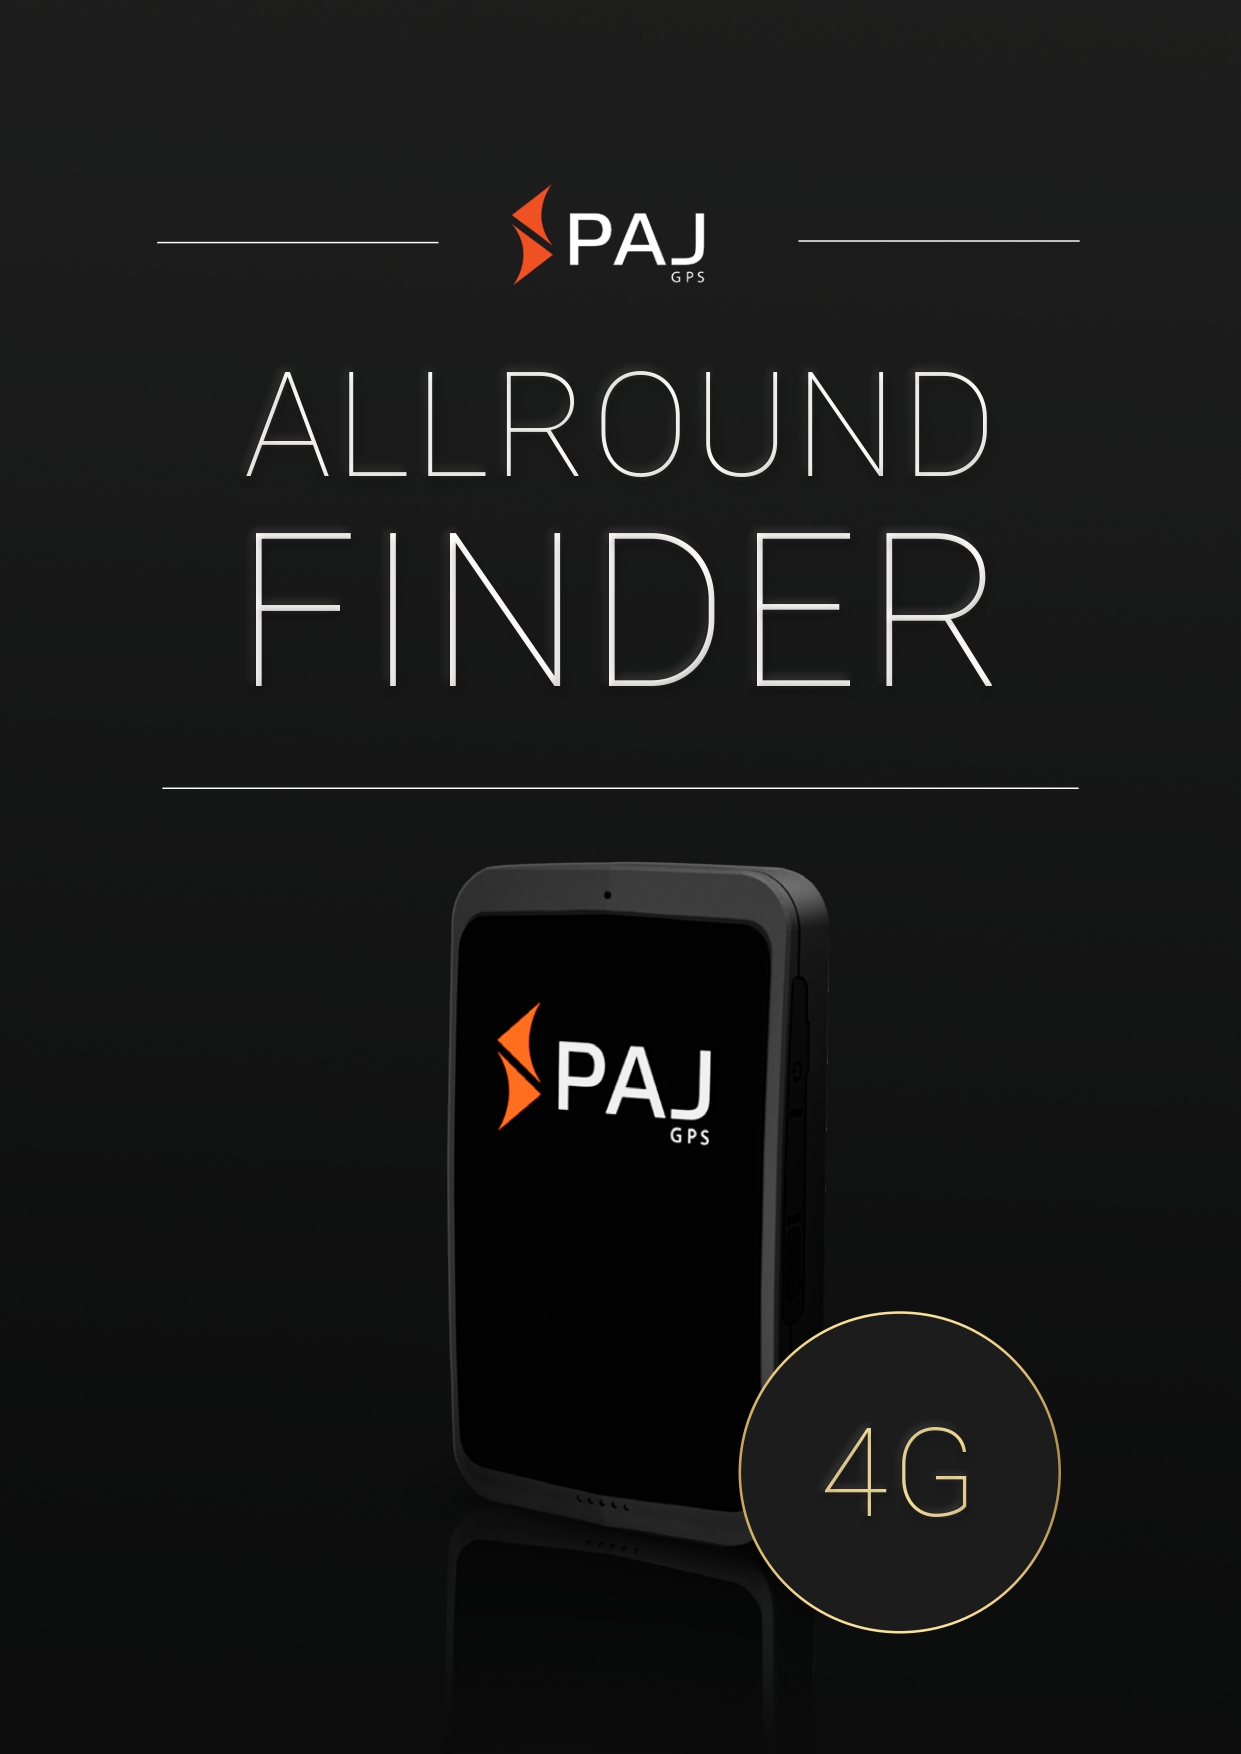 Thumbnail manual ALLROUND Finder 4G GPS Tracker from PAJ